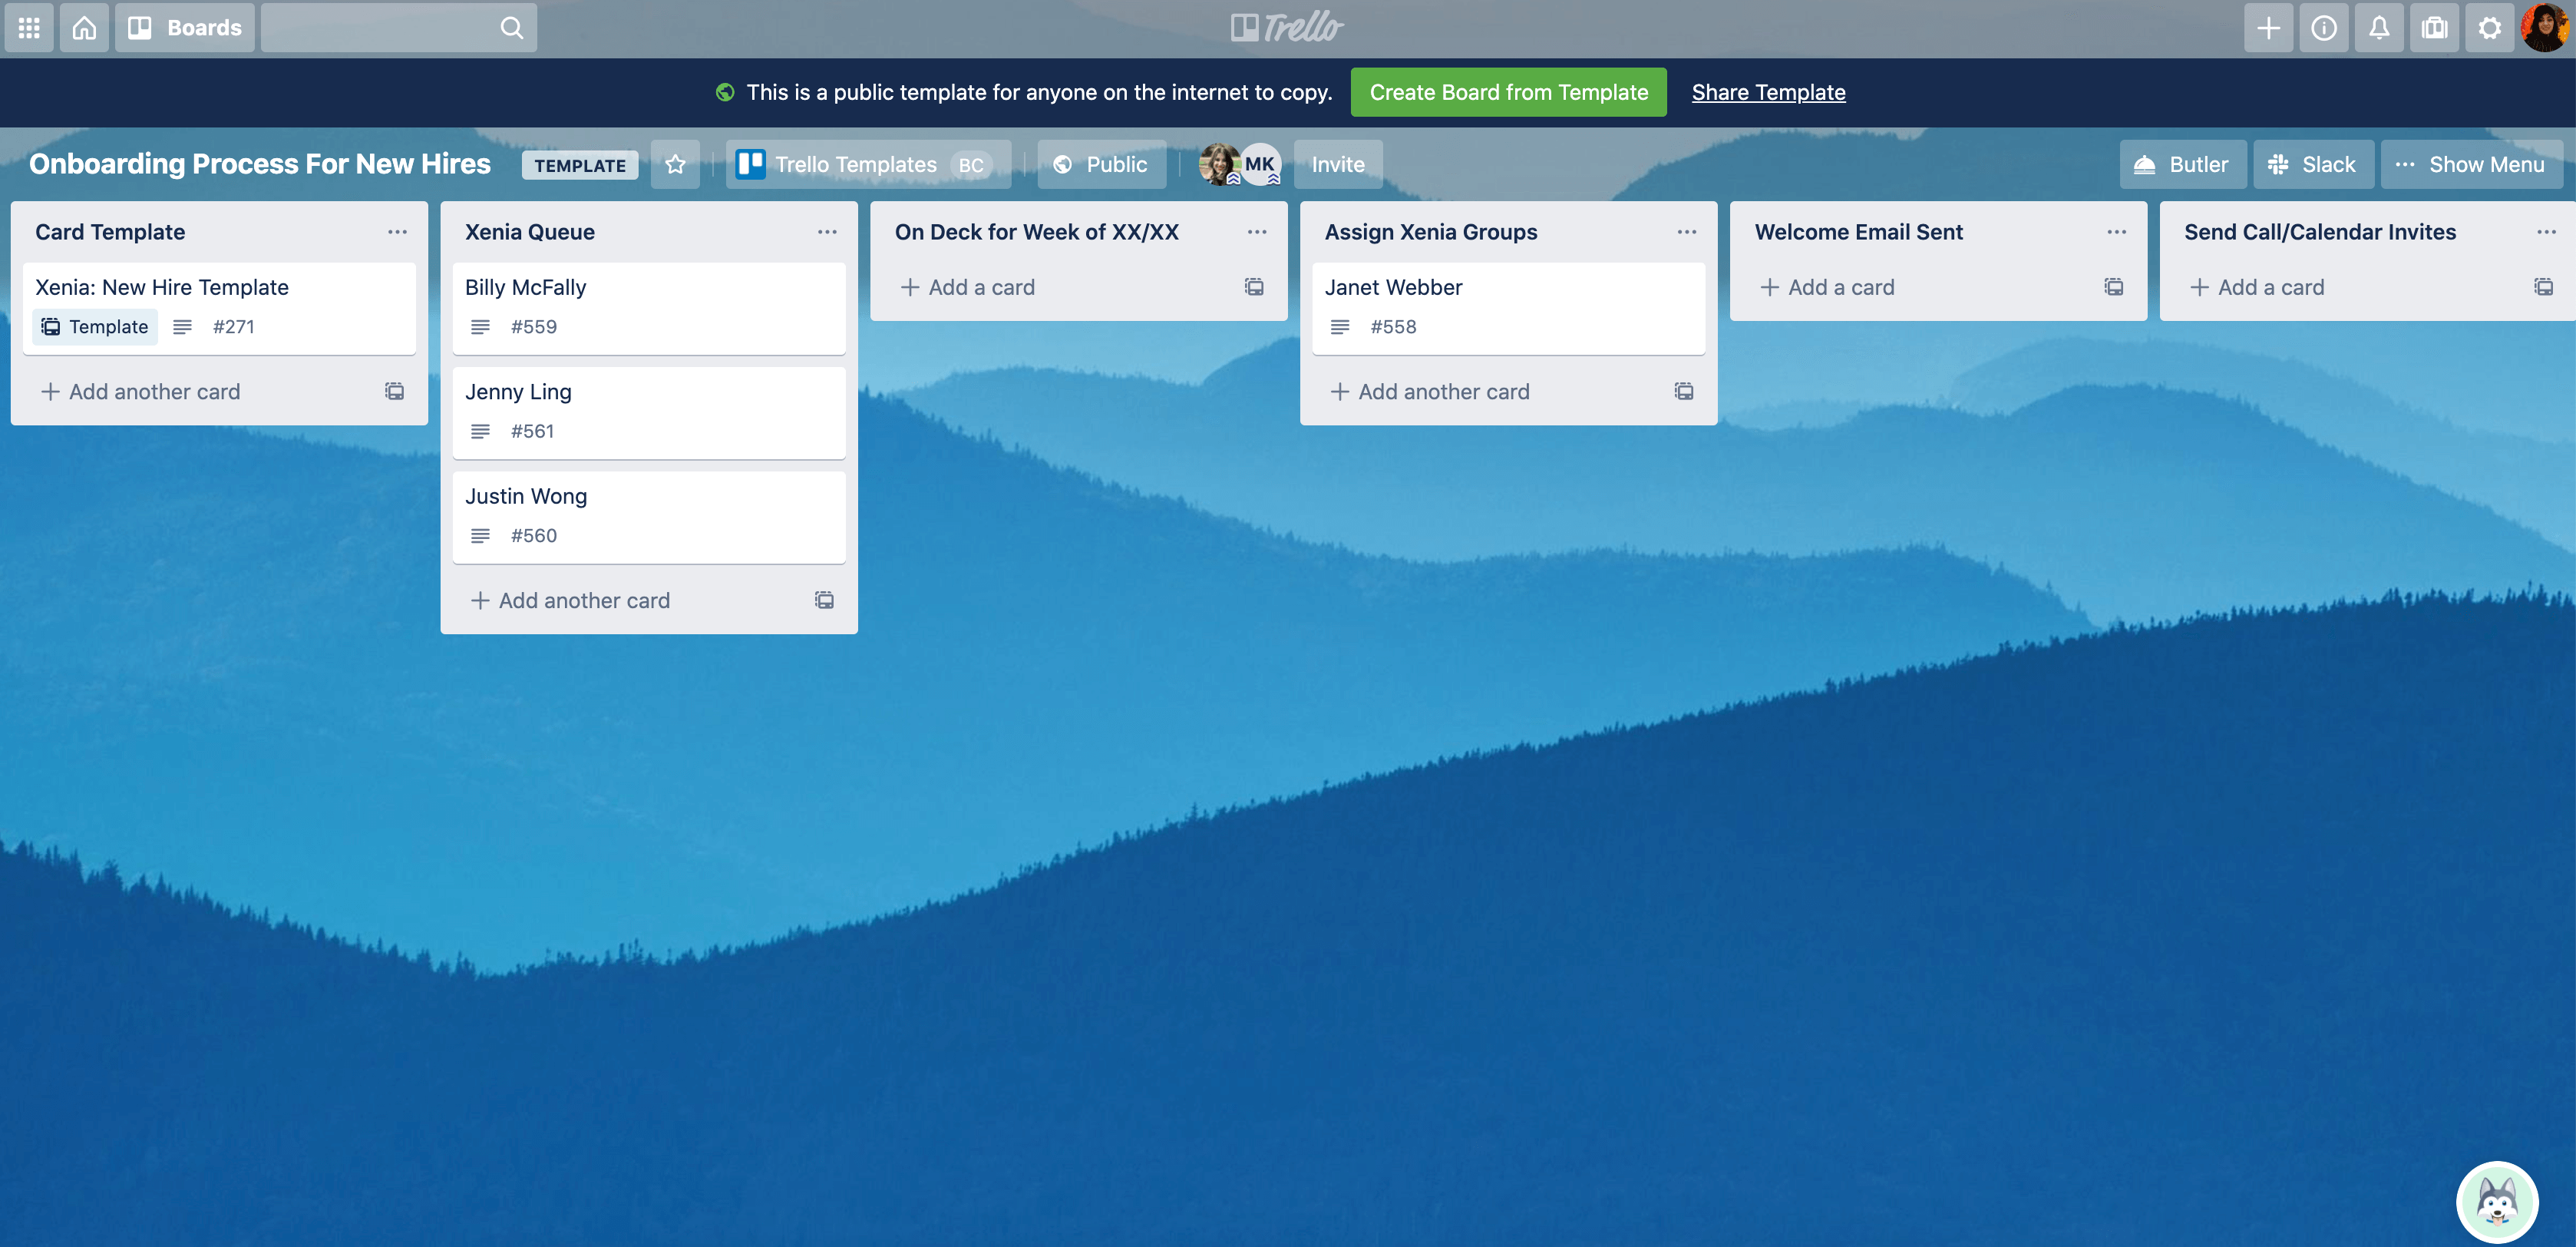 Onboarding process for new hires trello board template